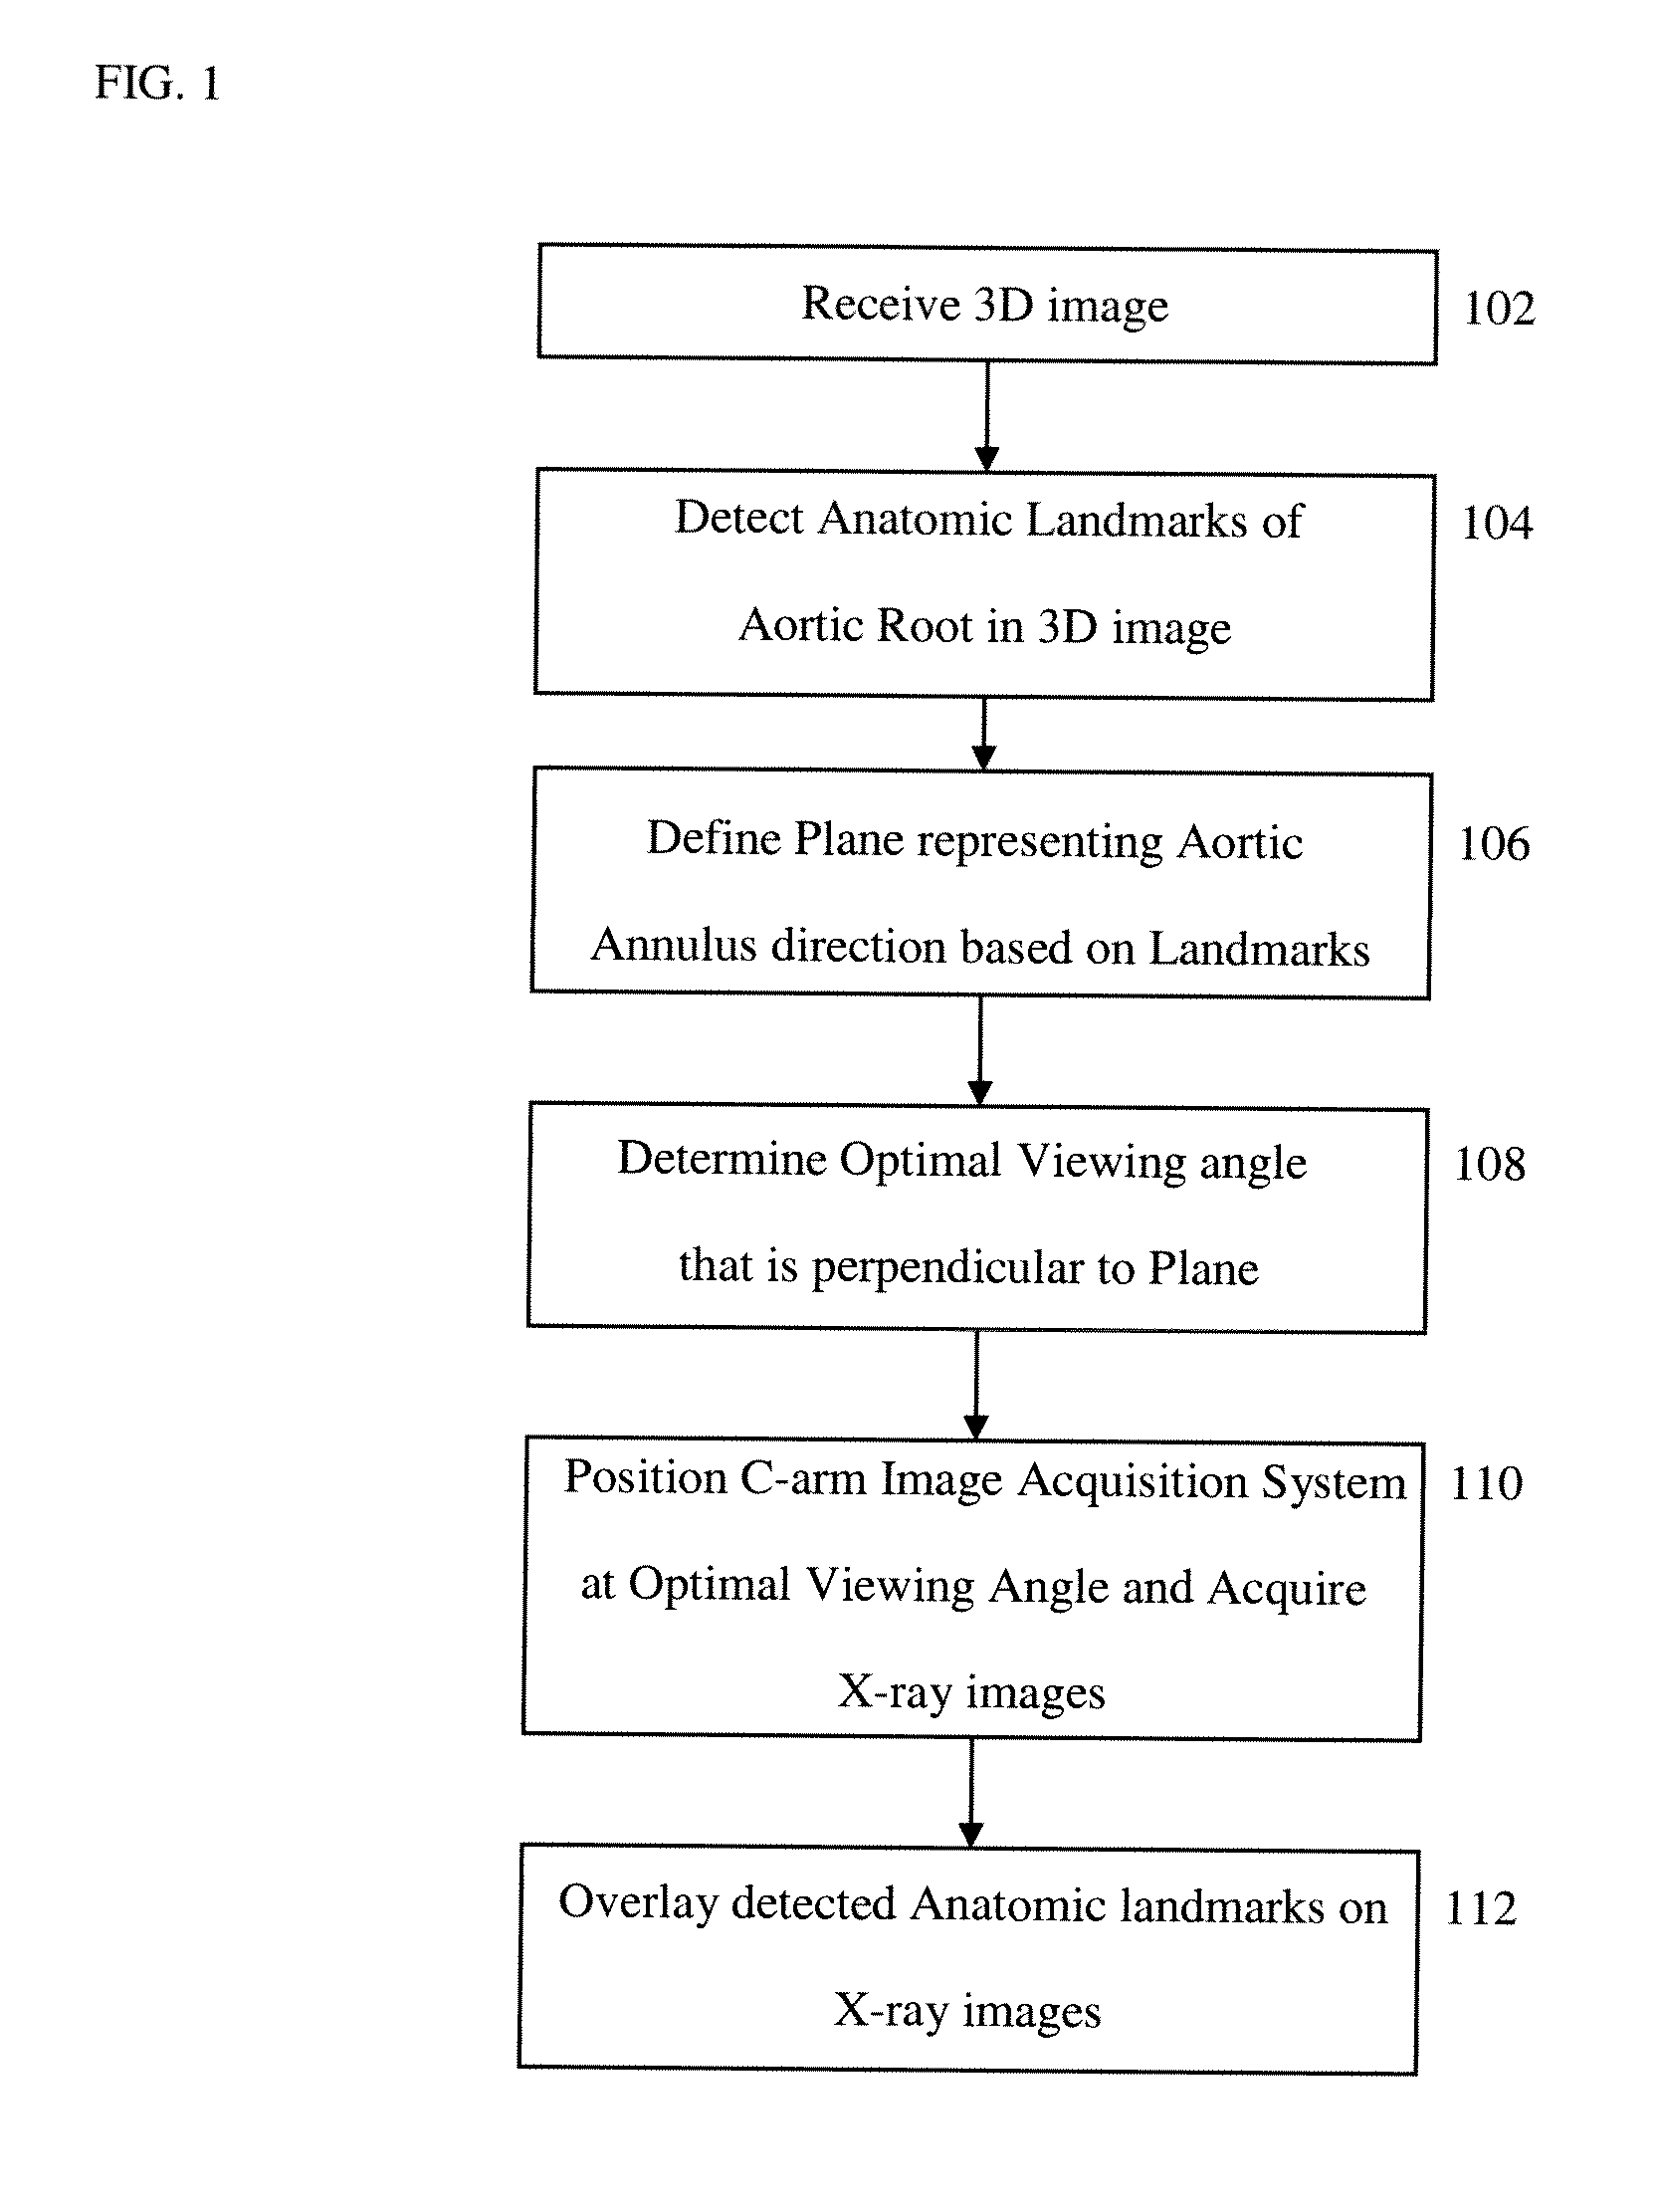 Method and Apparatus for Determining Angulation of C-Arm Image Acquisition System for Aortic Valve Implantation